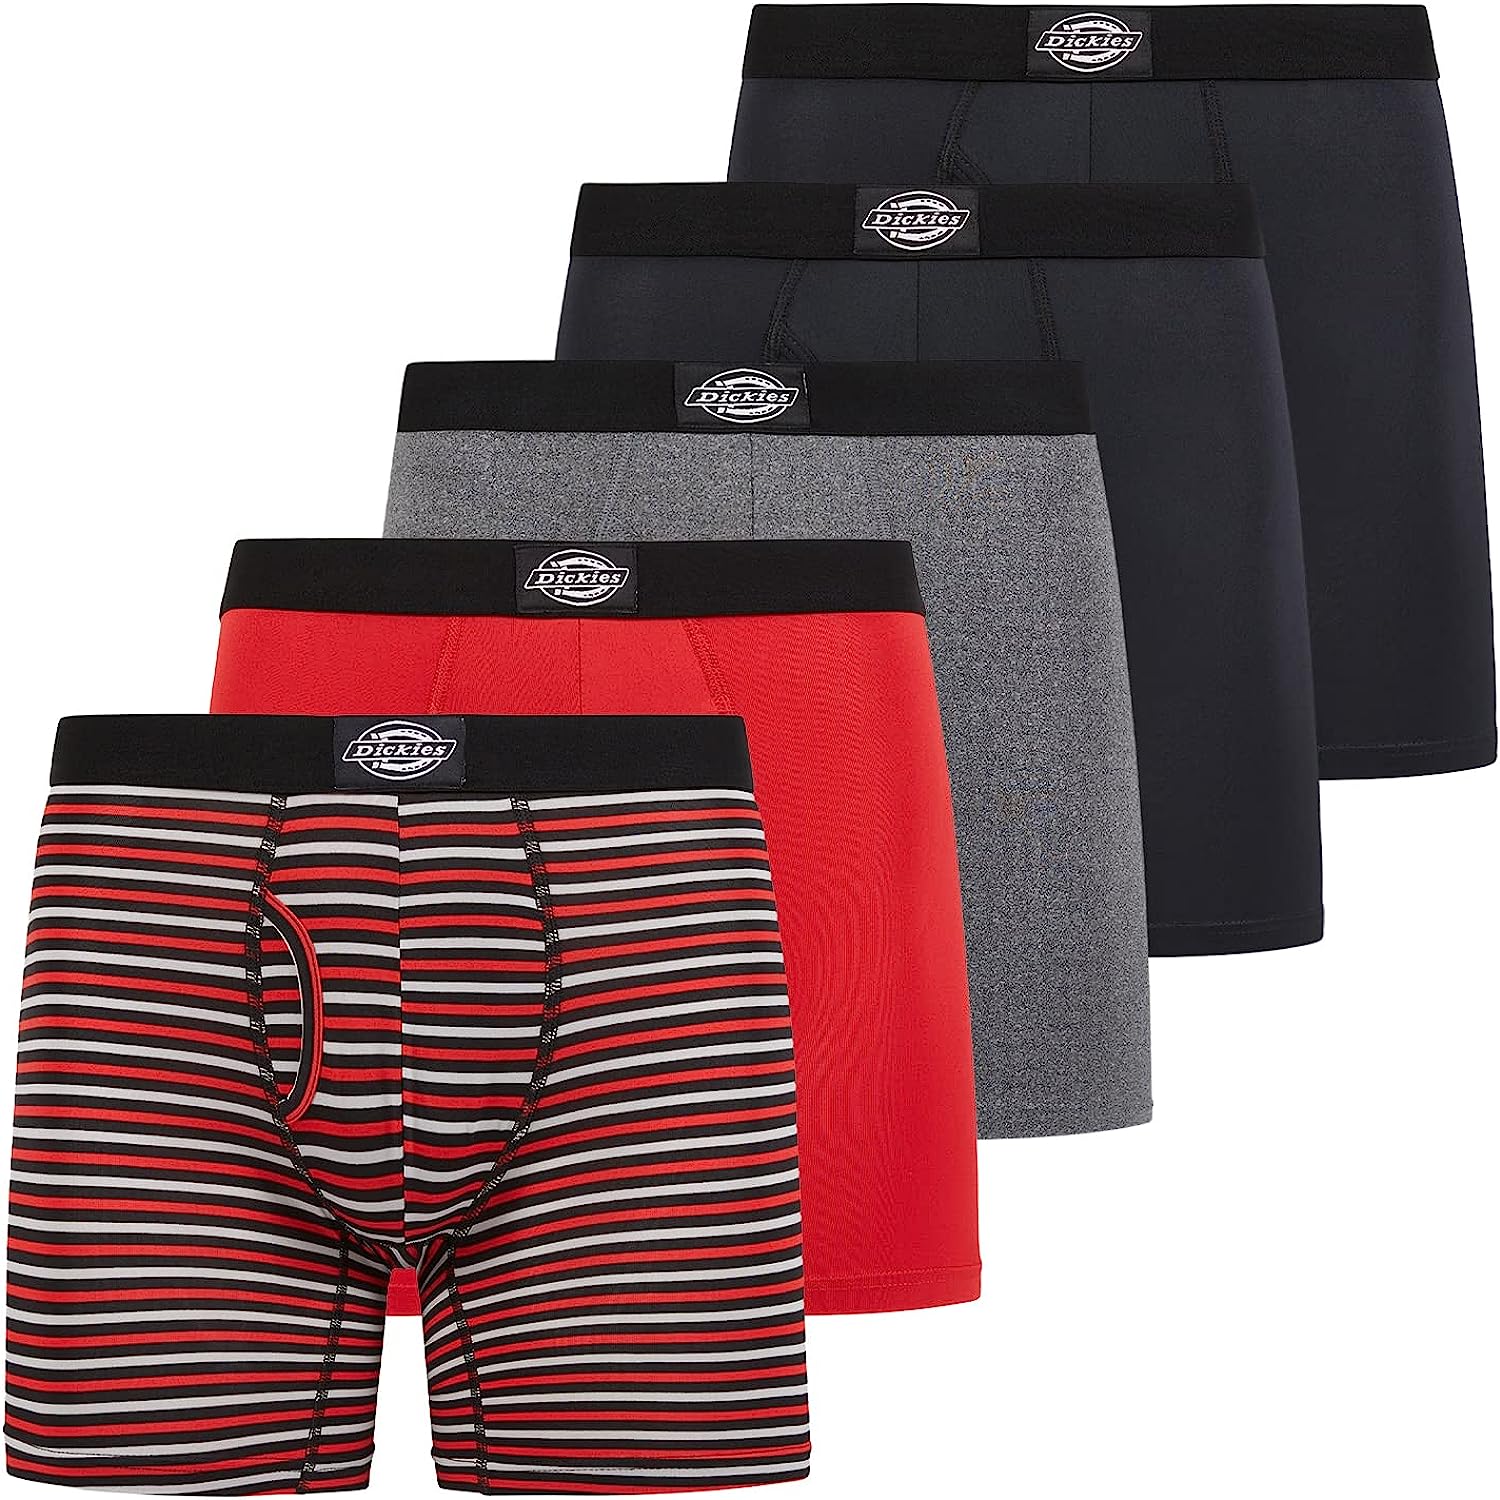 Dickies 5 Pack Mens Boxer Briefs With Pouch, Moisture Wicking Performance  Underw | eBay